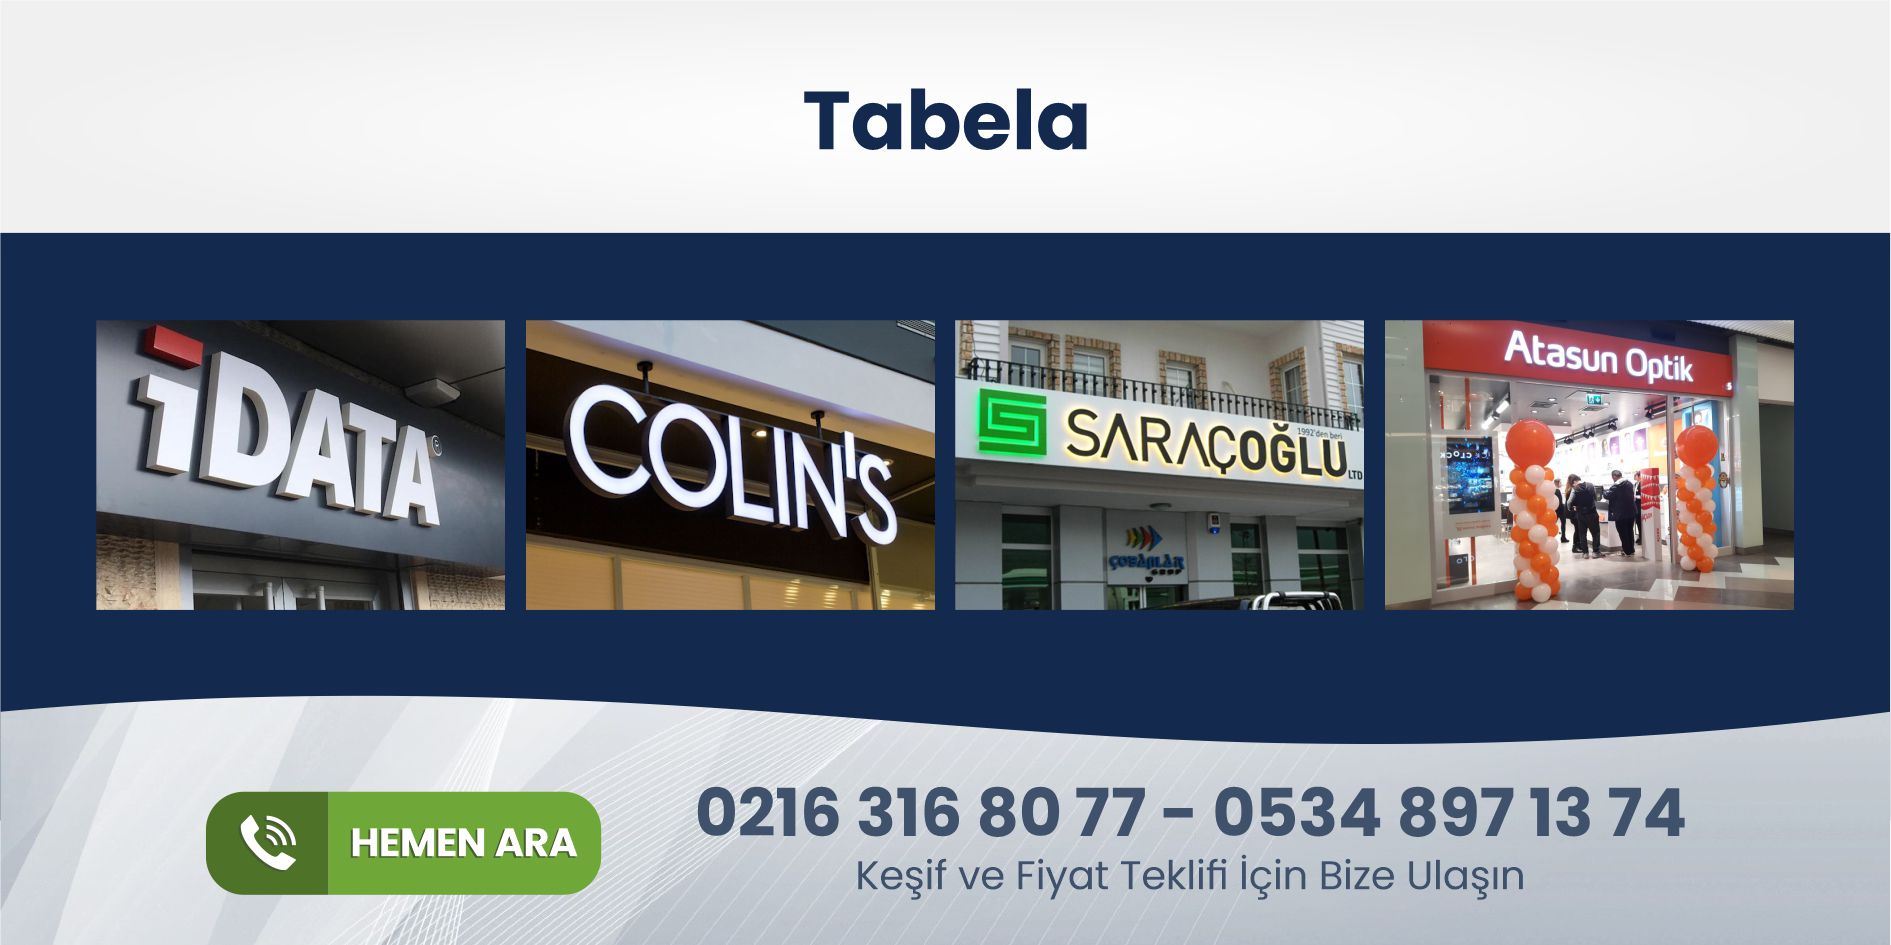 You are currently viewing Göztepe Tabela